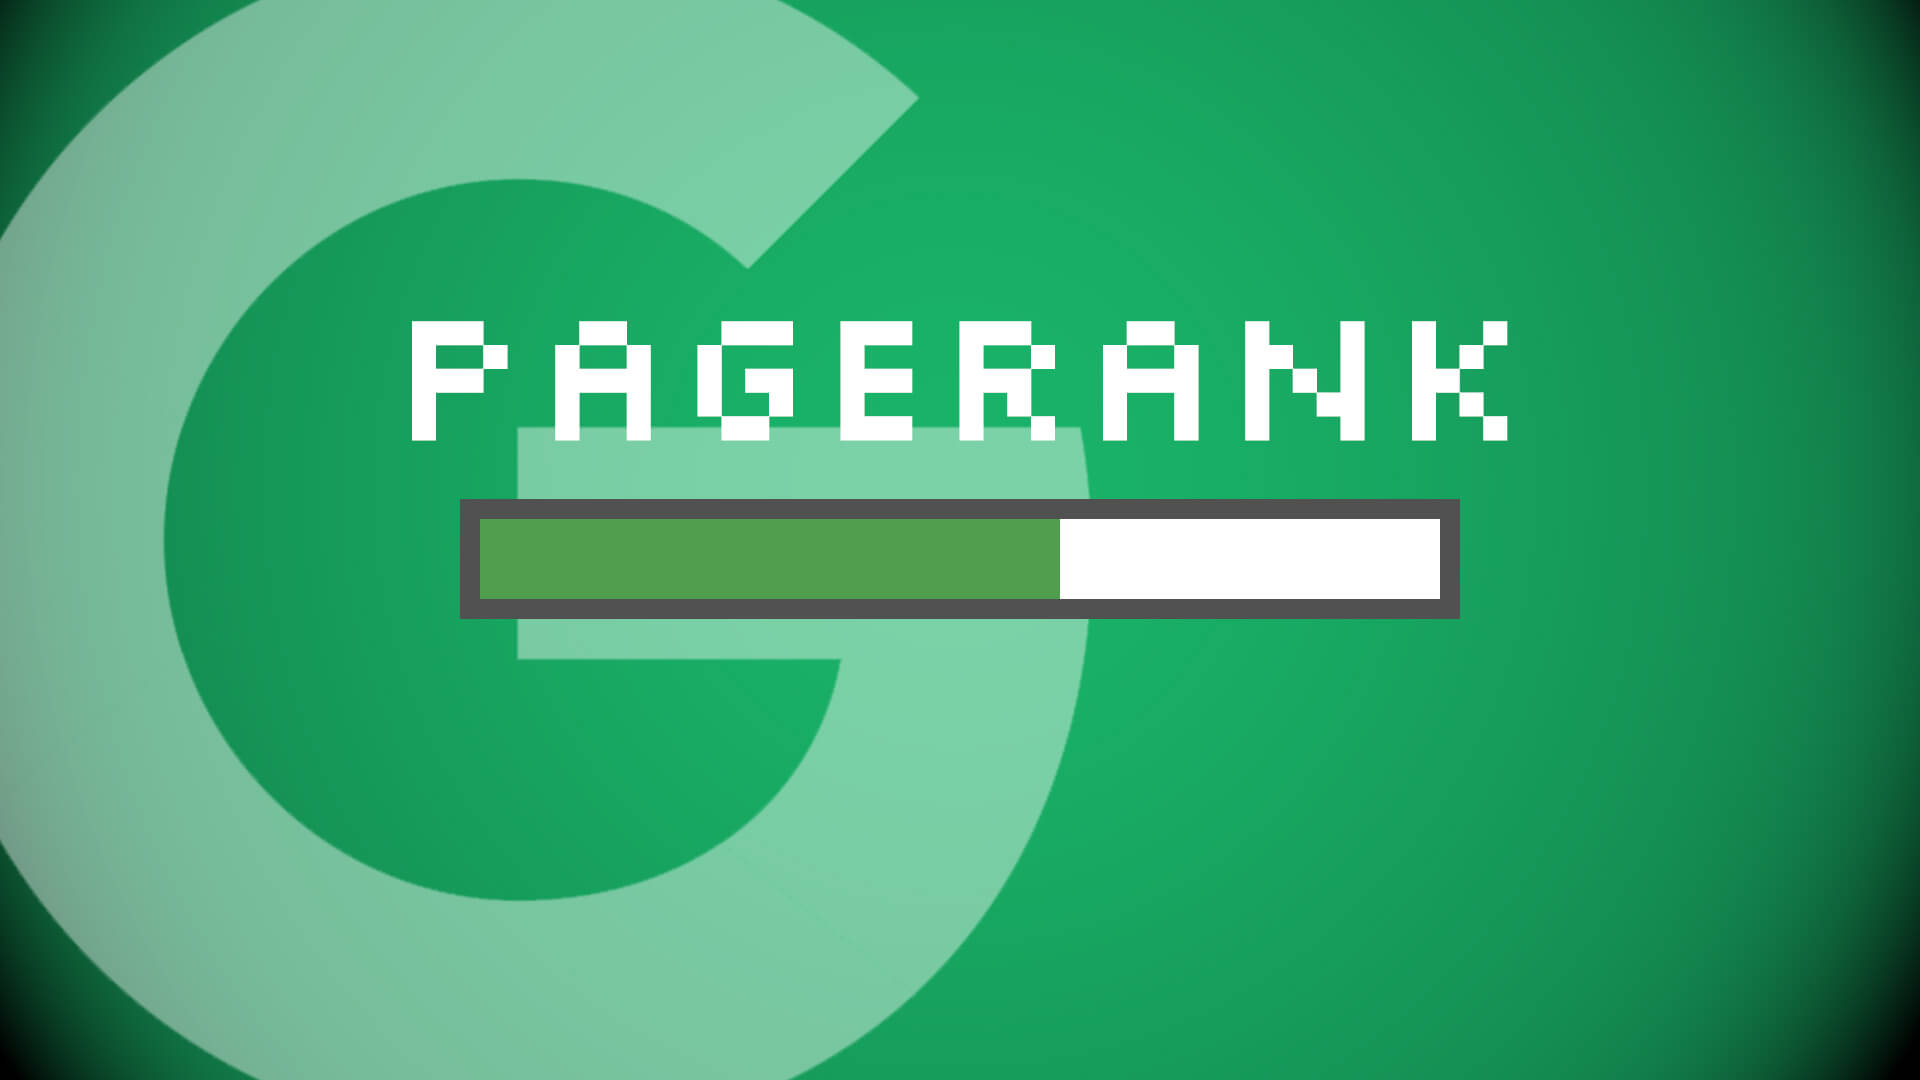 RIP Google PageRank score: A retrospective on how it ruined the web